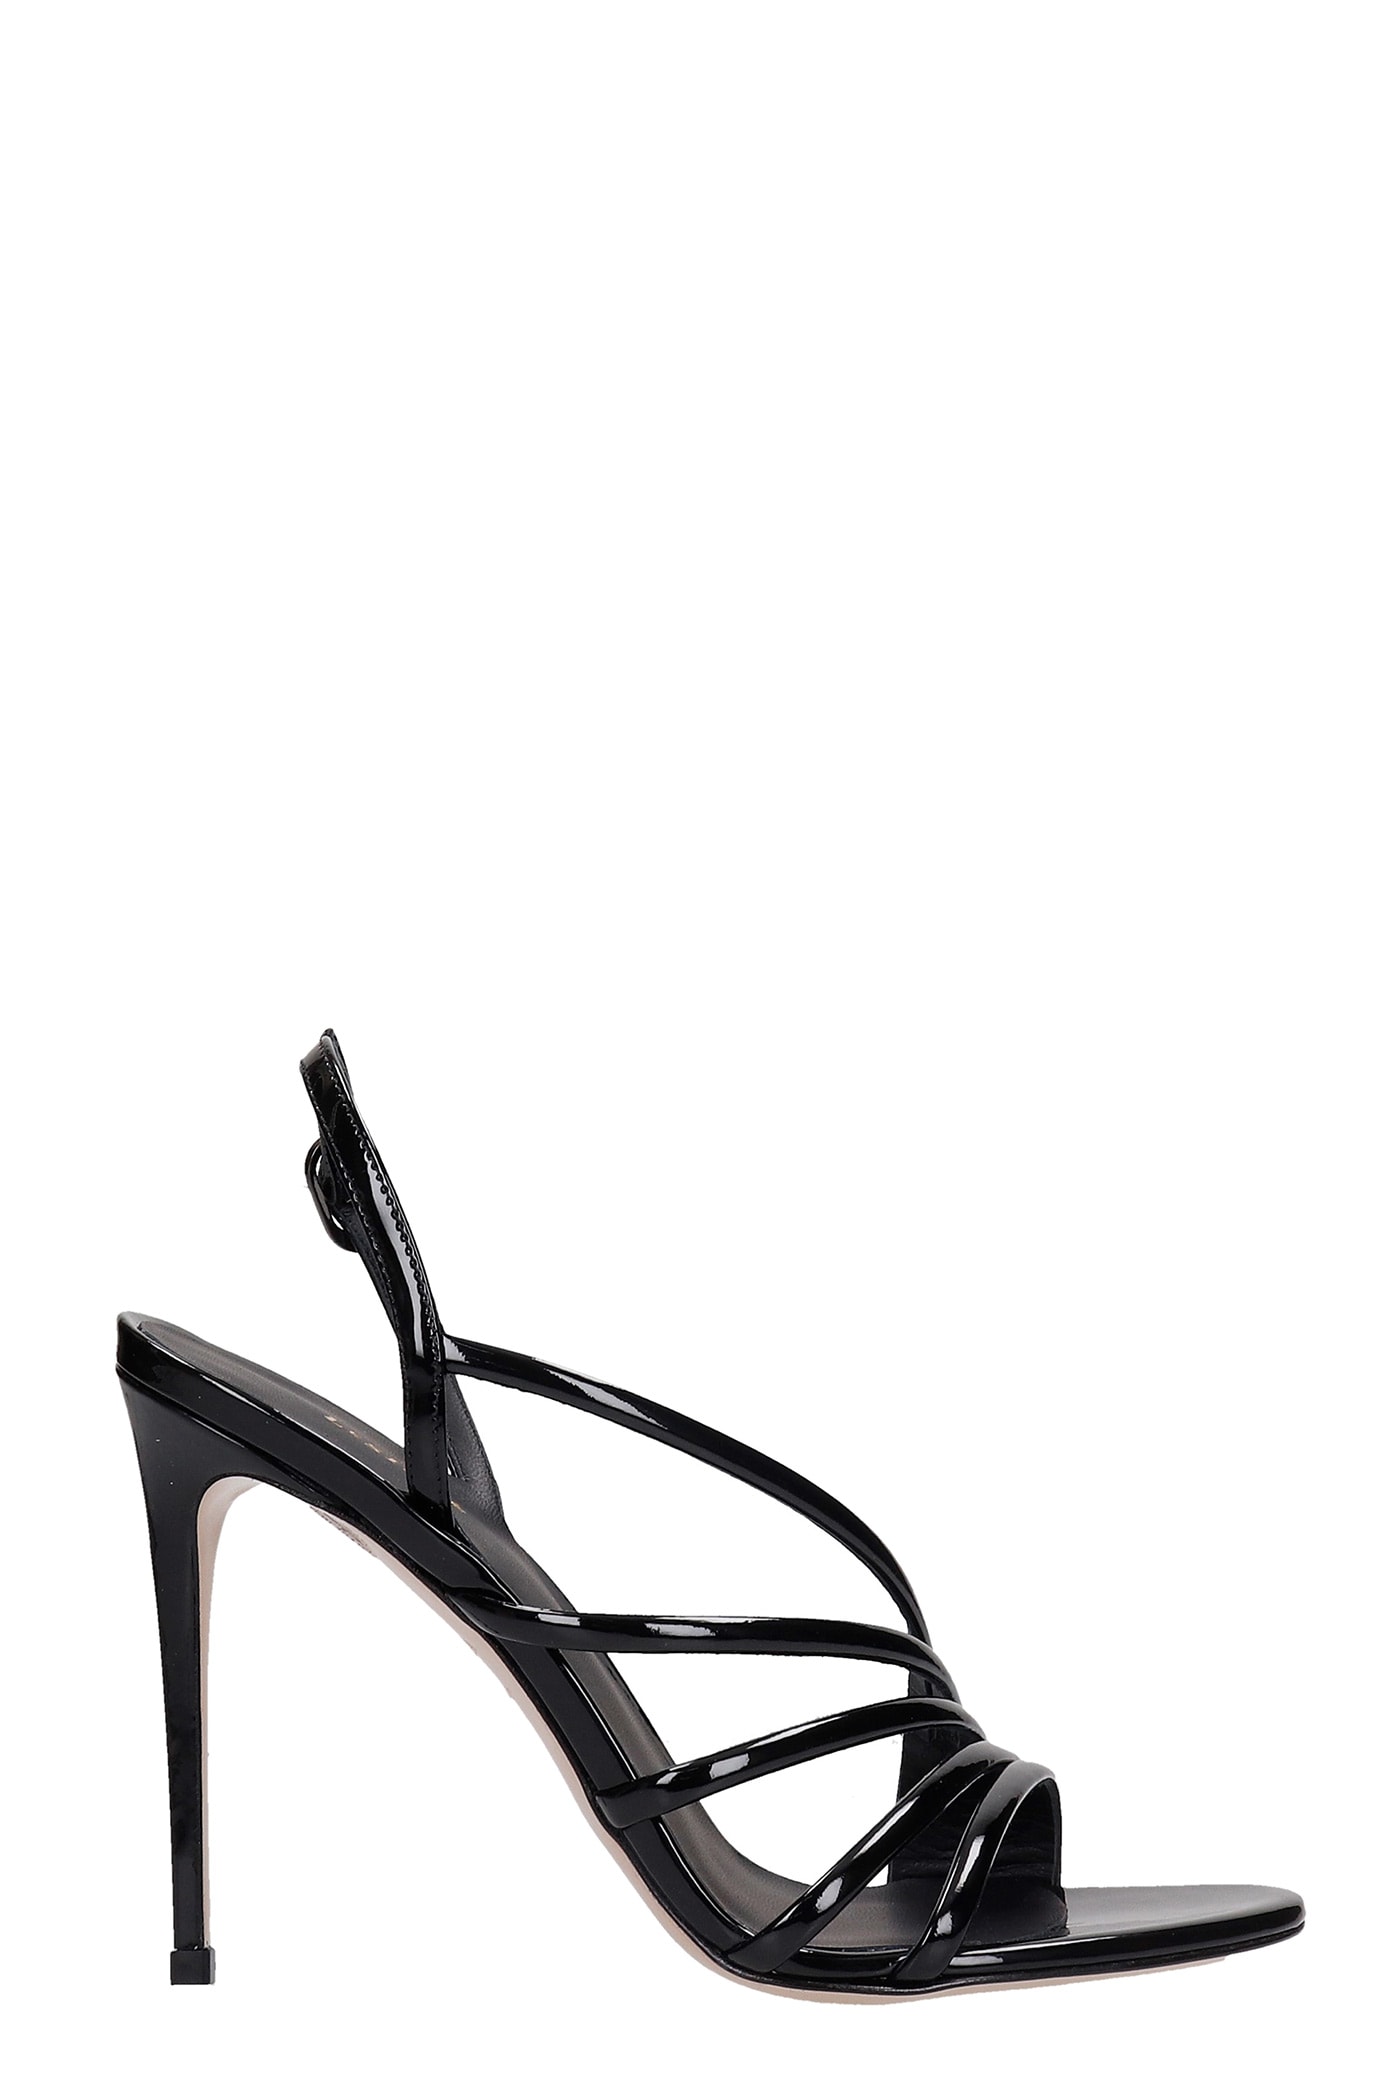 Le Silla Scarlet Sandals In Black Patent Leather